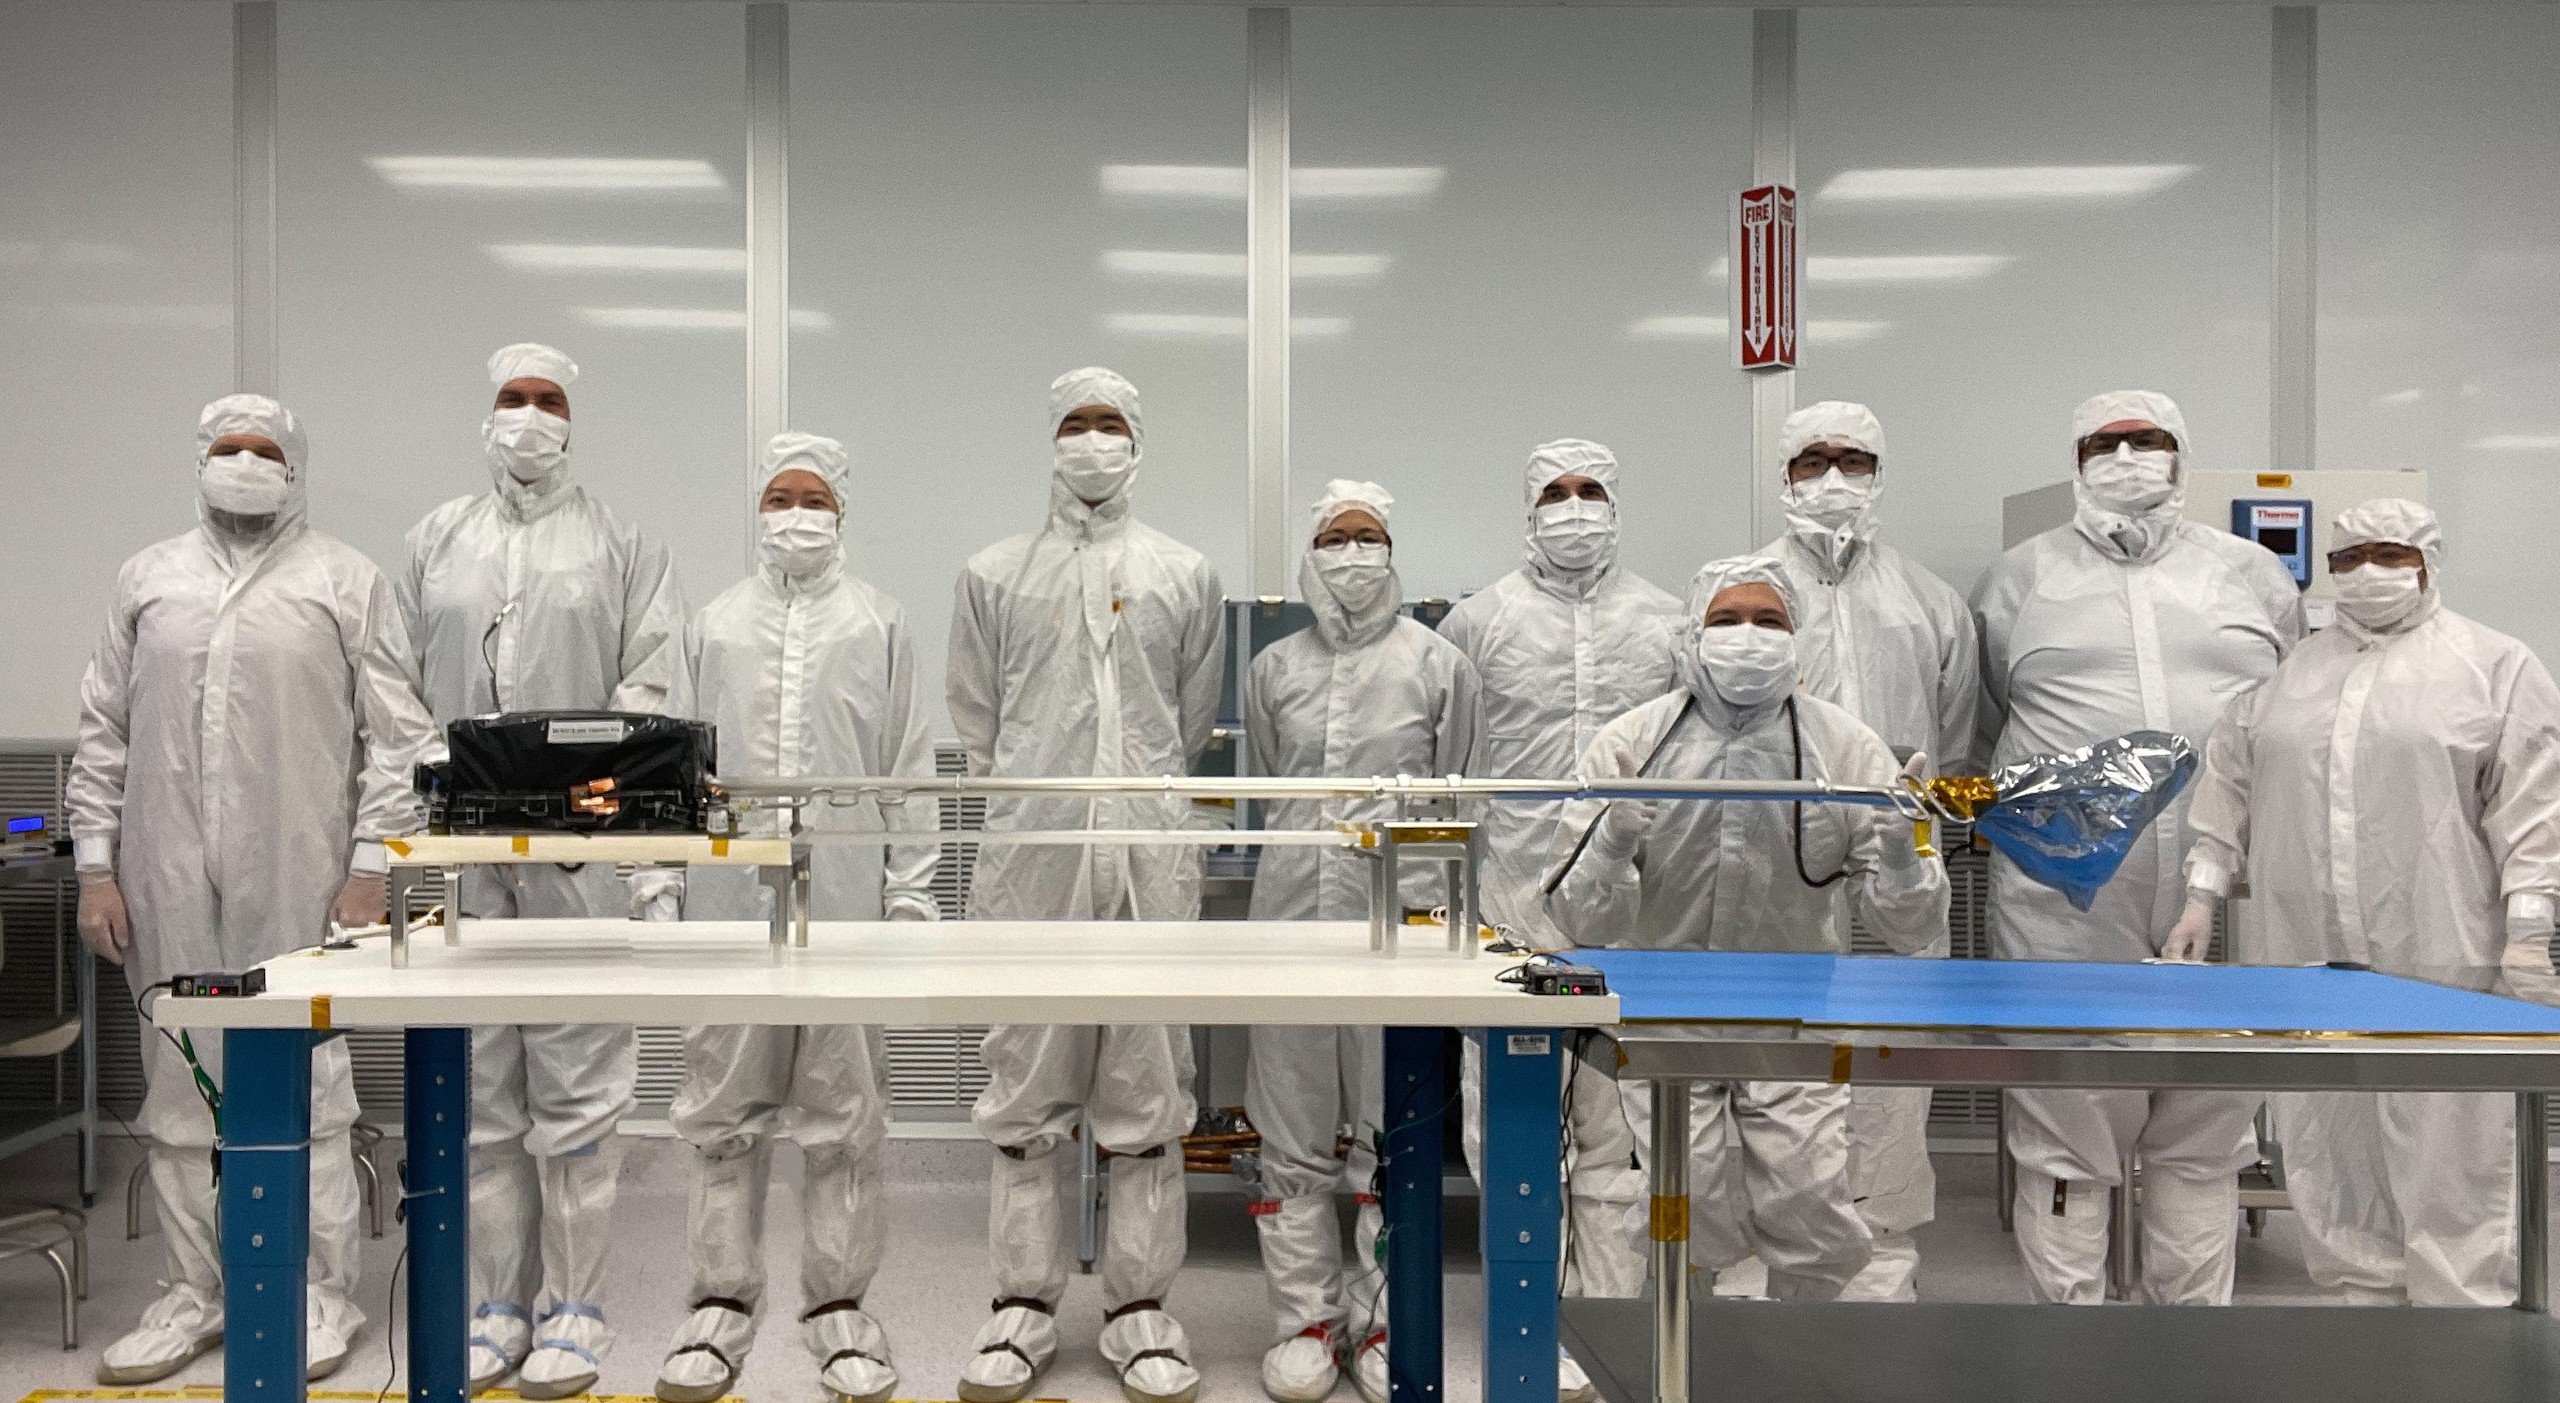 The flight assembly team in the lab.